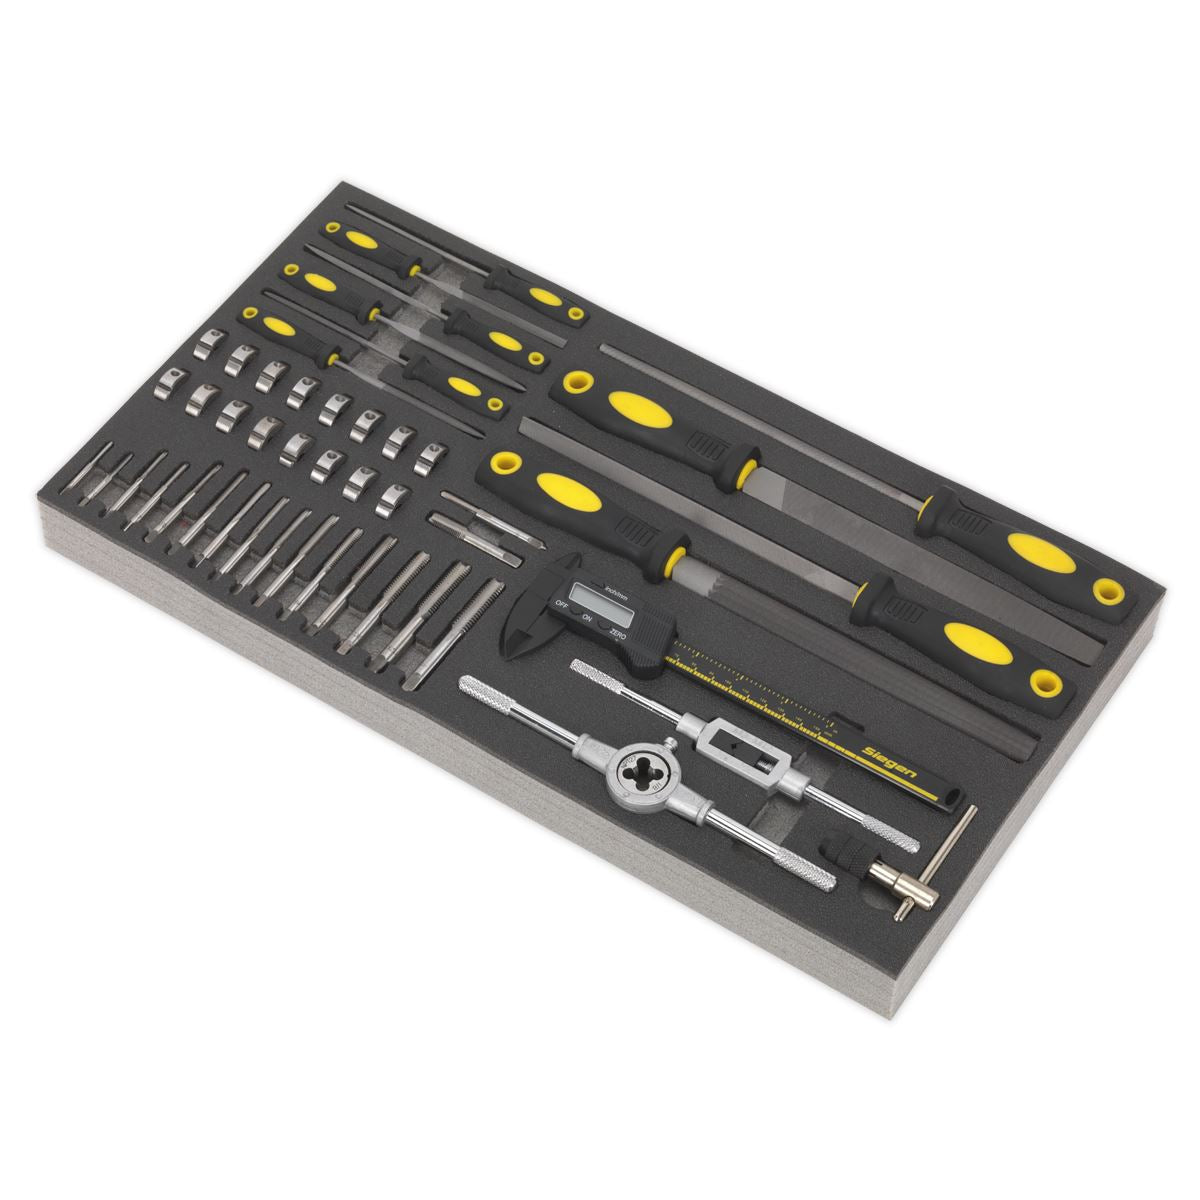 Siegen by Sealey Tool Tray with Tap & Die, File & Caliper Set 48pc